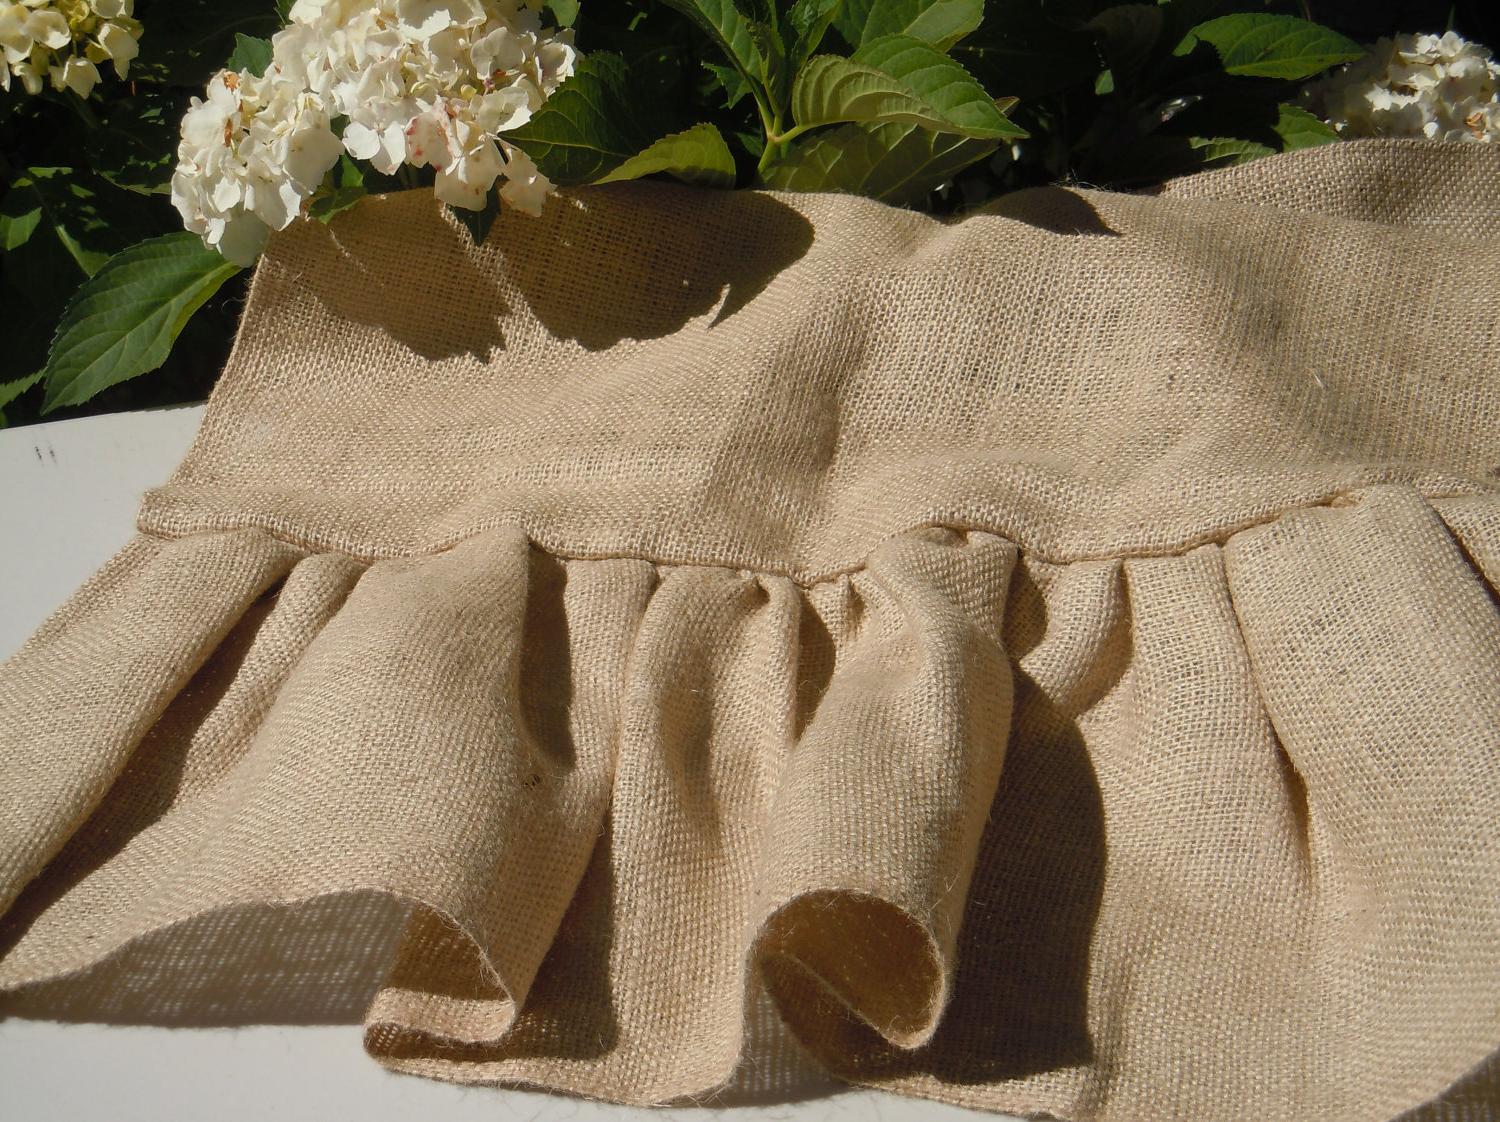 Burlap Table Runner with